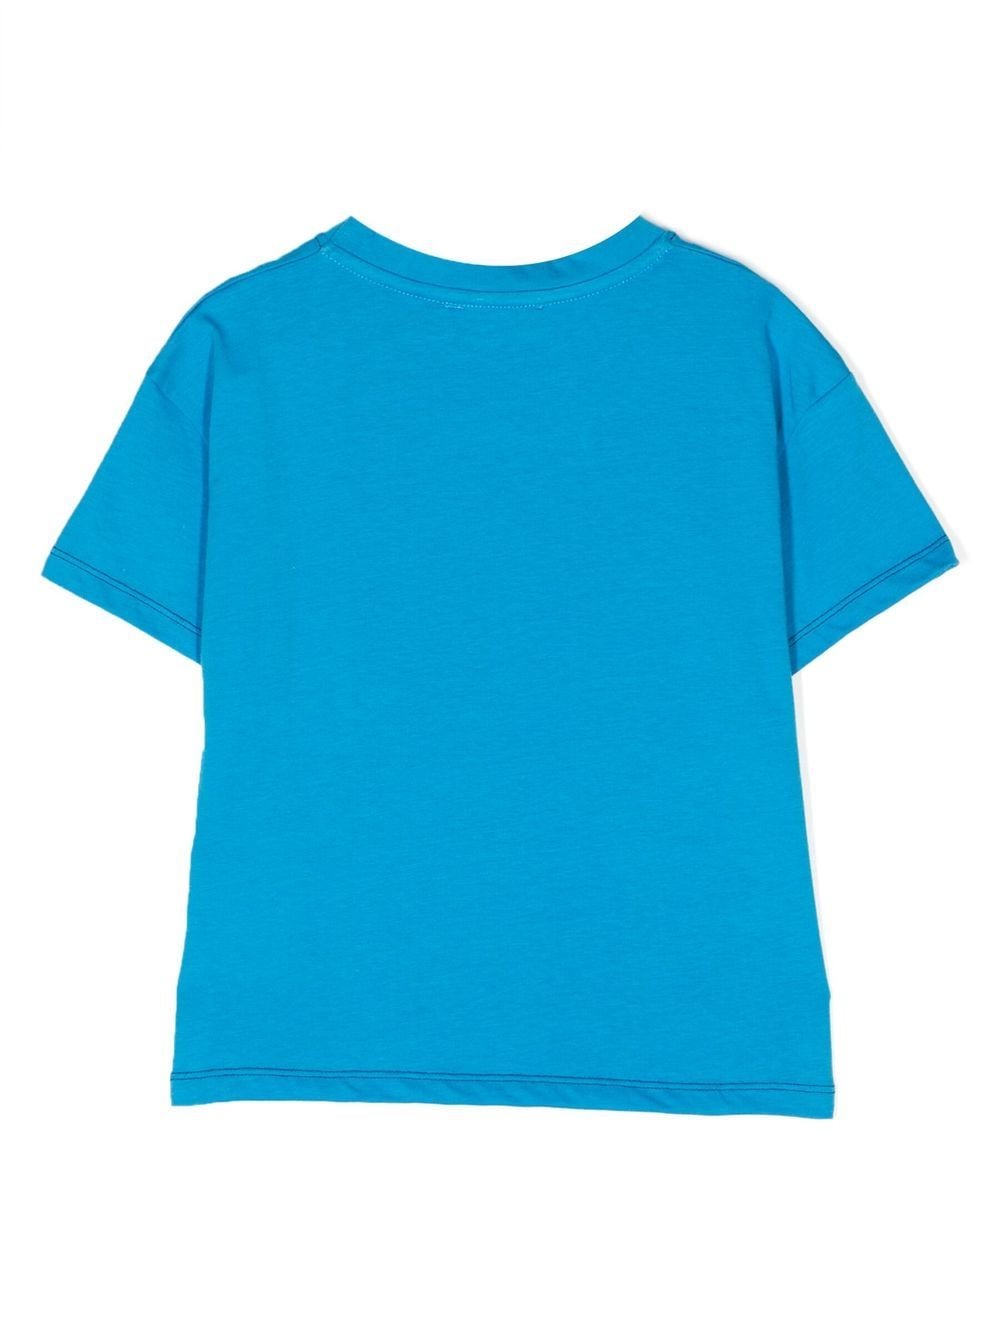 KINDRED T-shirt met contrasterend stiksel - Blauw